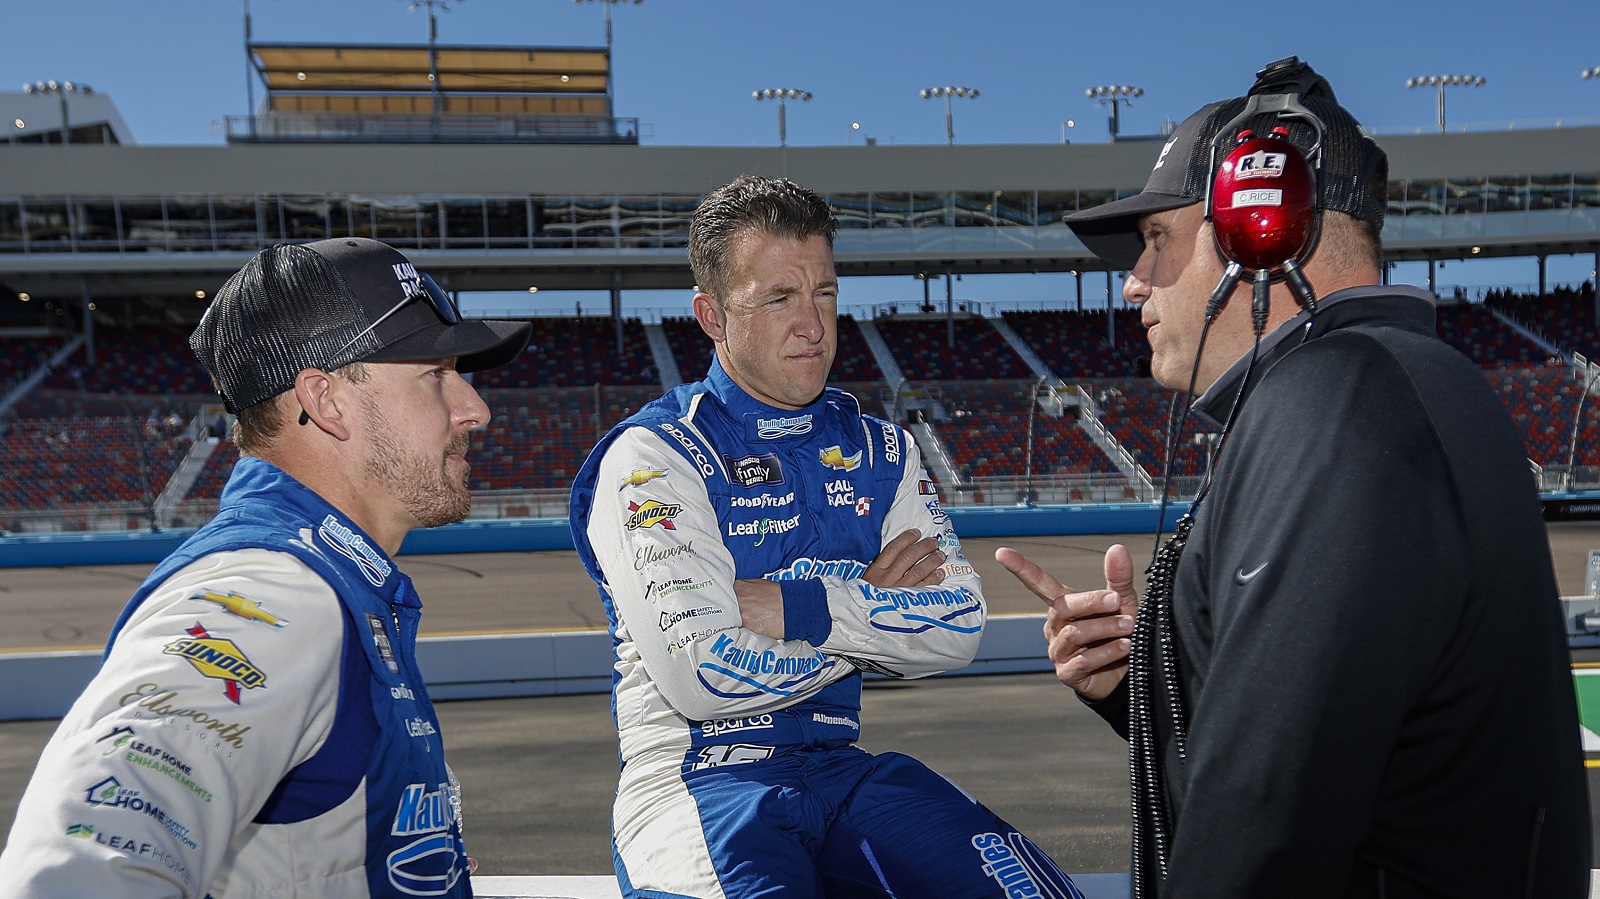 Drivers Daniel Hemric and AJ Allmendinger speak with and Chris Rice, president of Kaulig Racing, on the grid during qualifying for the NASCAR Xfinity Series United Rentals 200 at Phoenix Raceway on March 12, 2022. | Sean Gardner/Getty Images